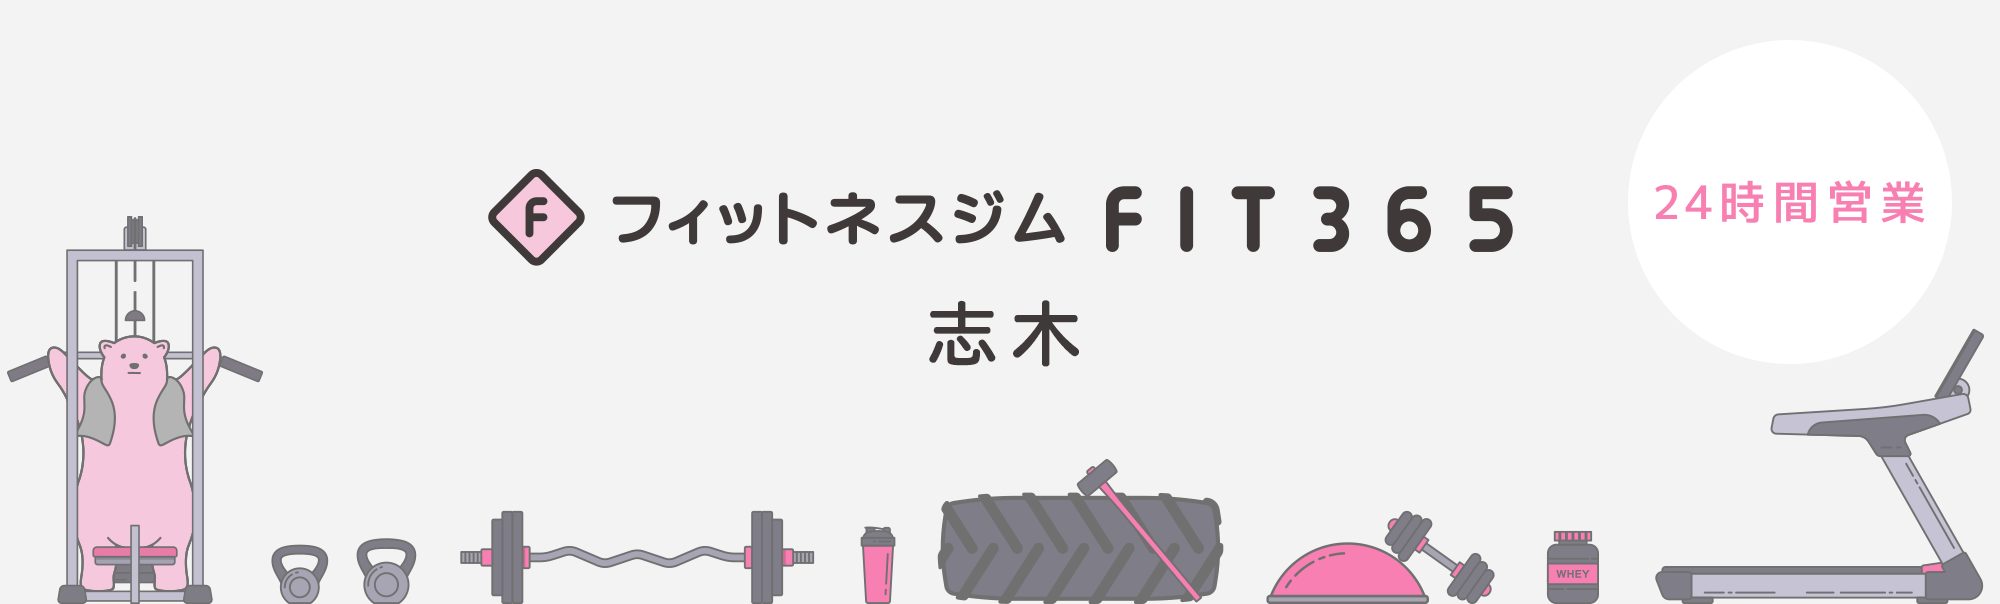 FIT365 志木